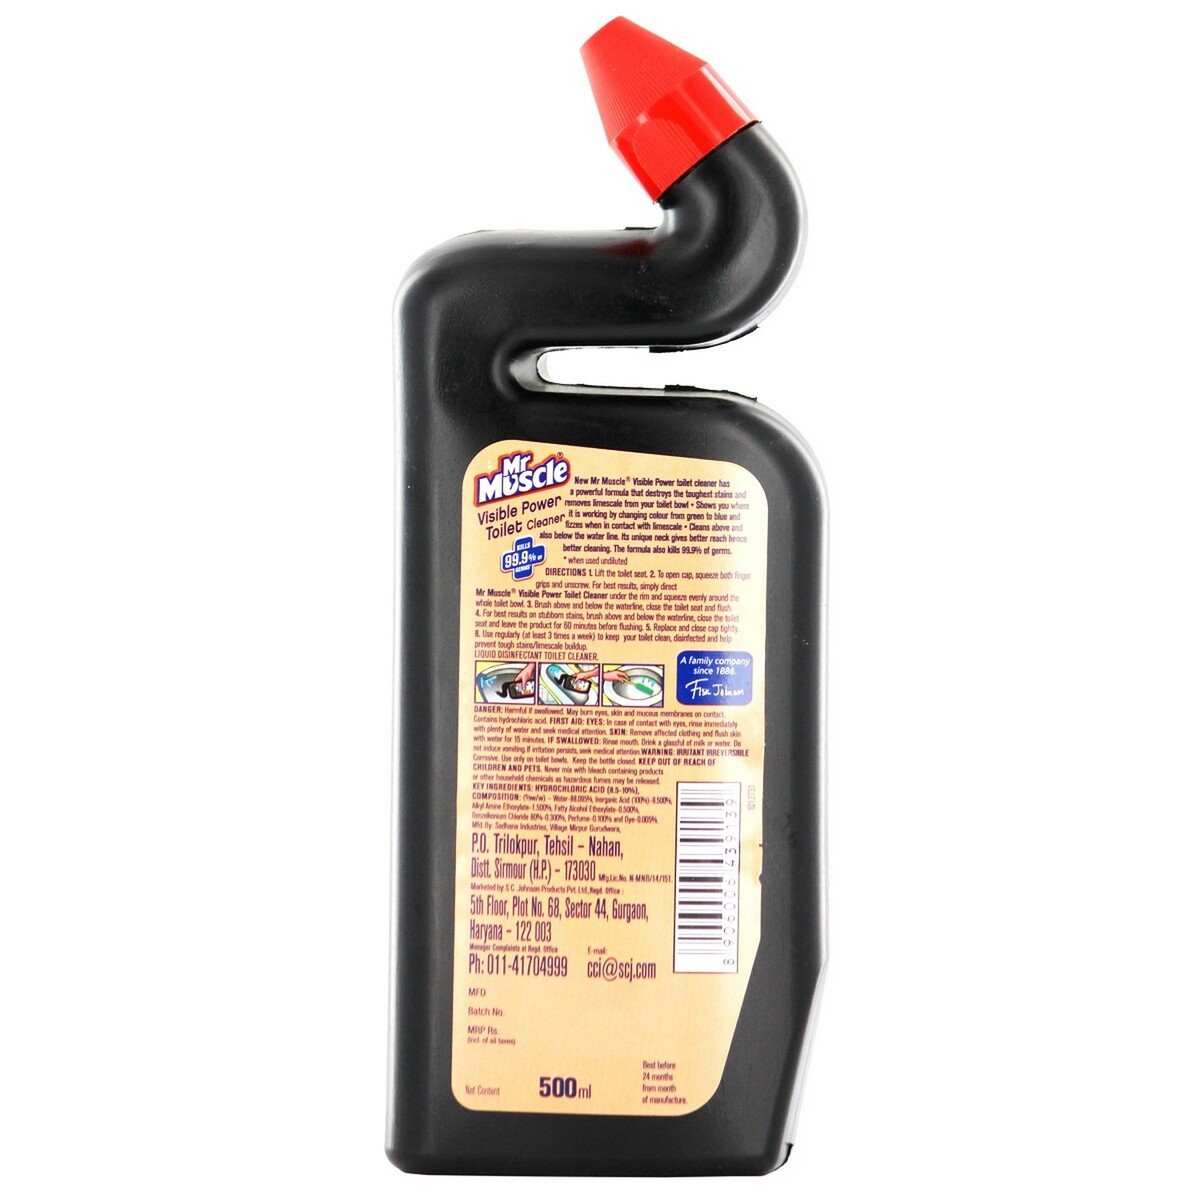 Mr. Muscle Visible Power Toilet Cleaner 500ml